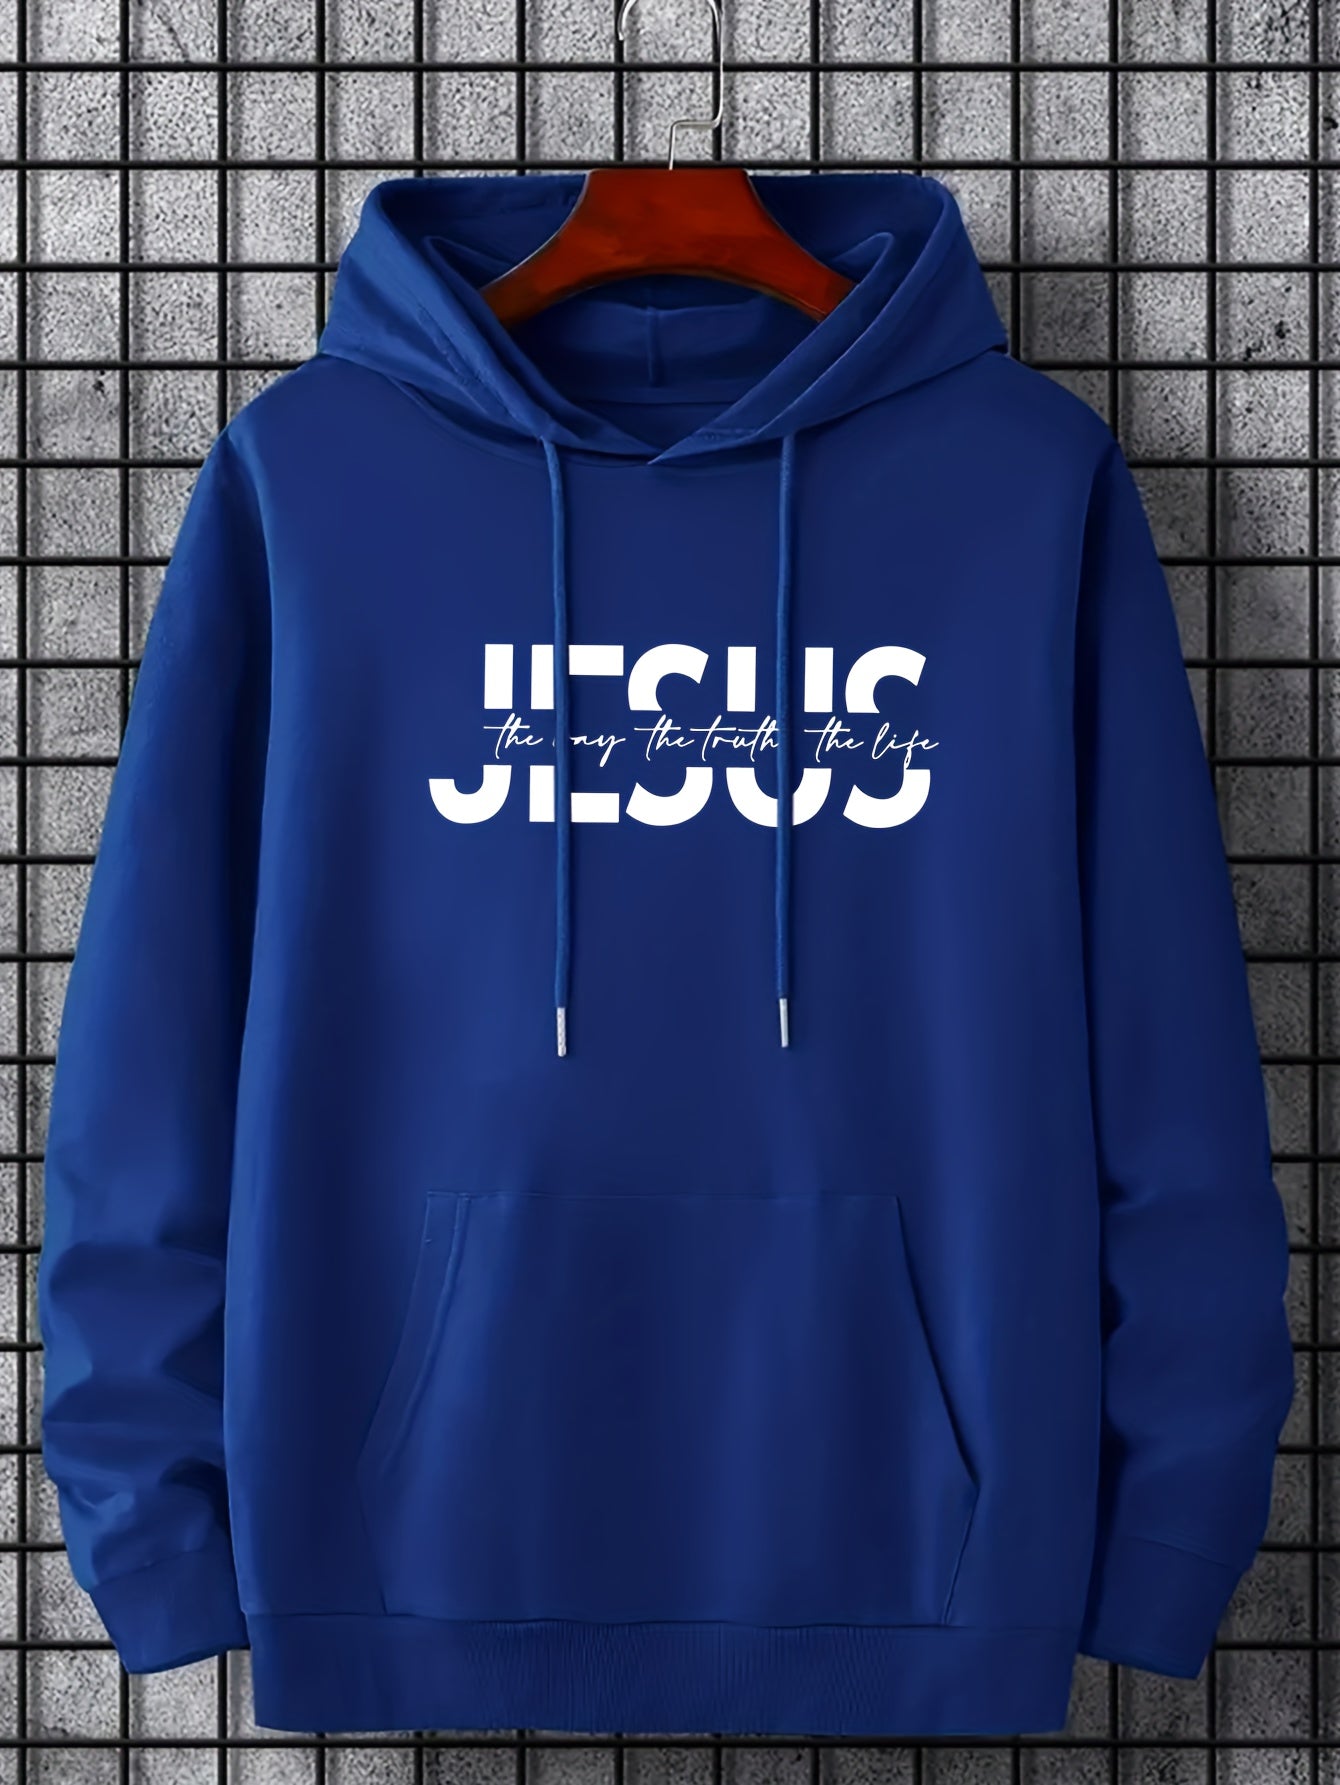 "JESUS" Print, Hoodies For Men, Graphic Sweatshirt With Kangaroo Pocket, Comfy Trendy Hooded Pullover, Mens Clothing For Fall Winter